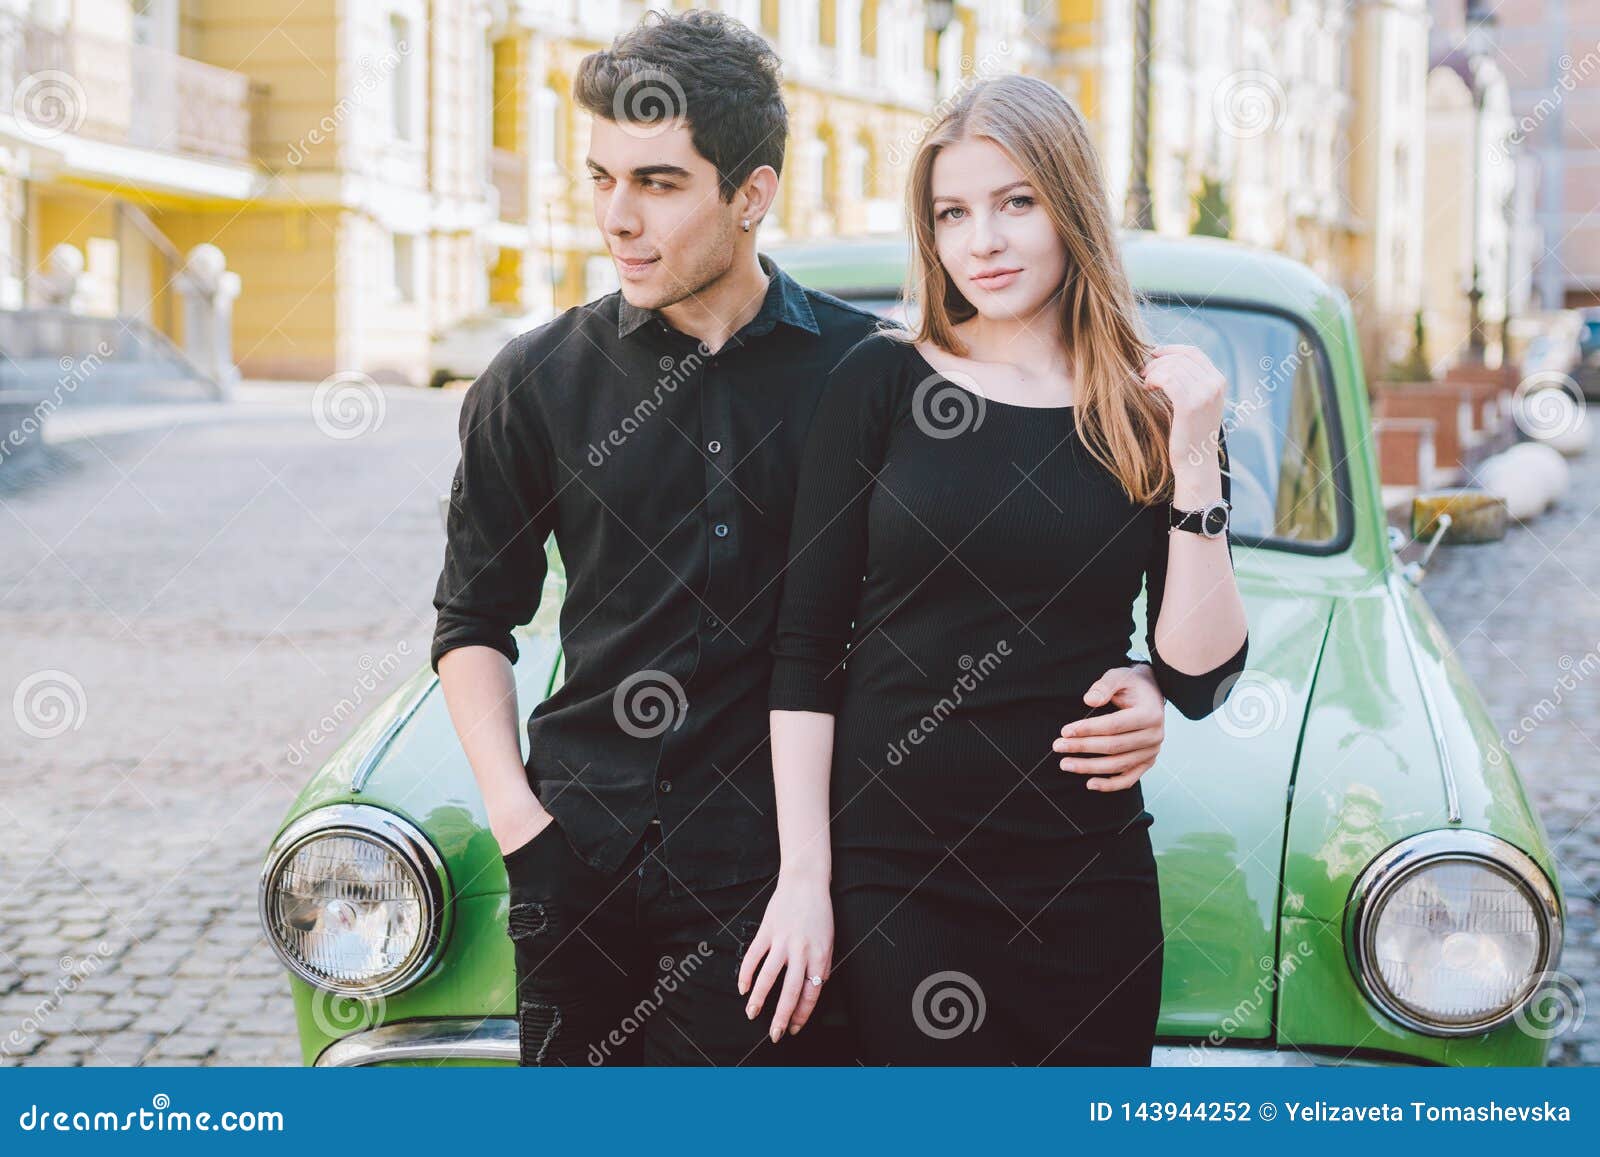 Male Female Model Stock Photos and Images - 123RF